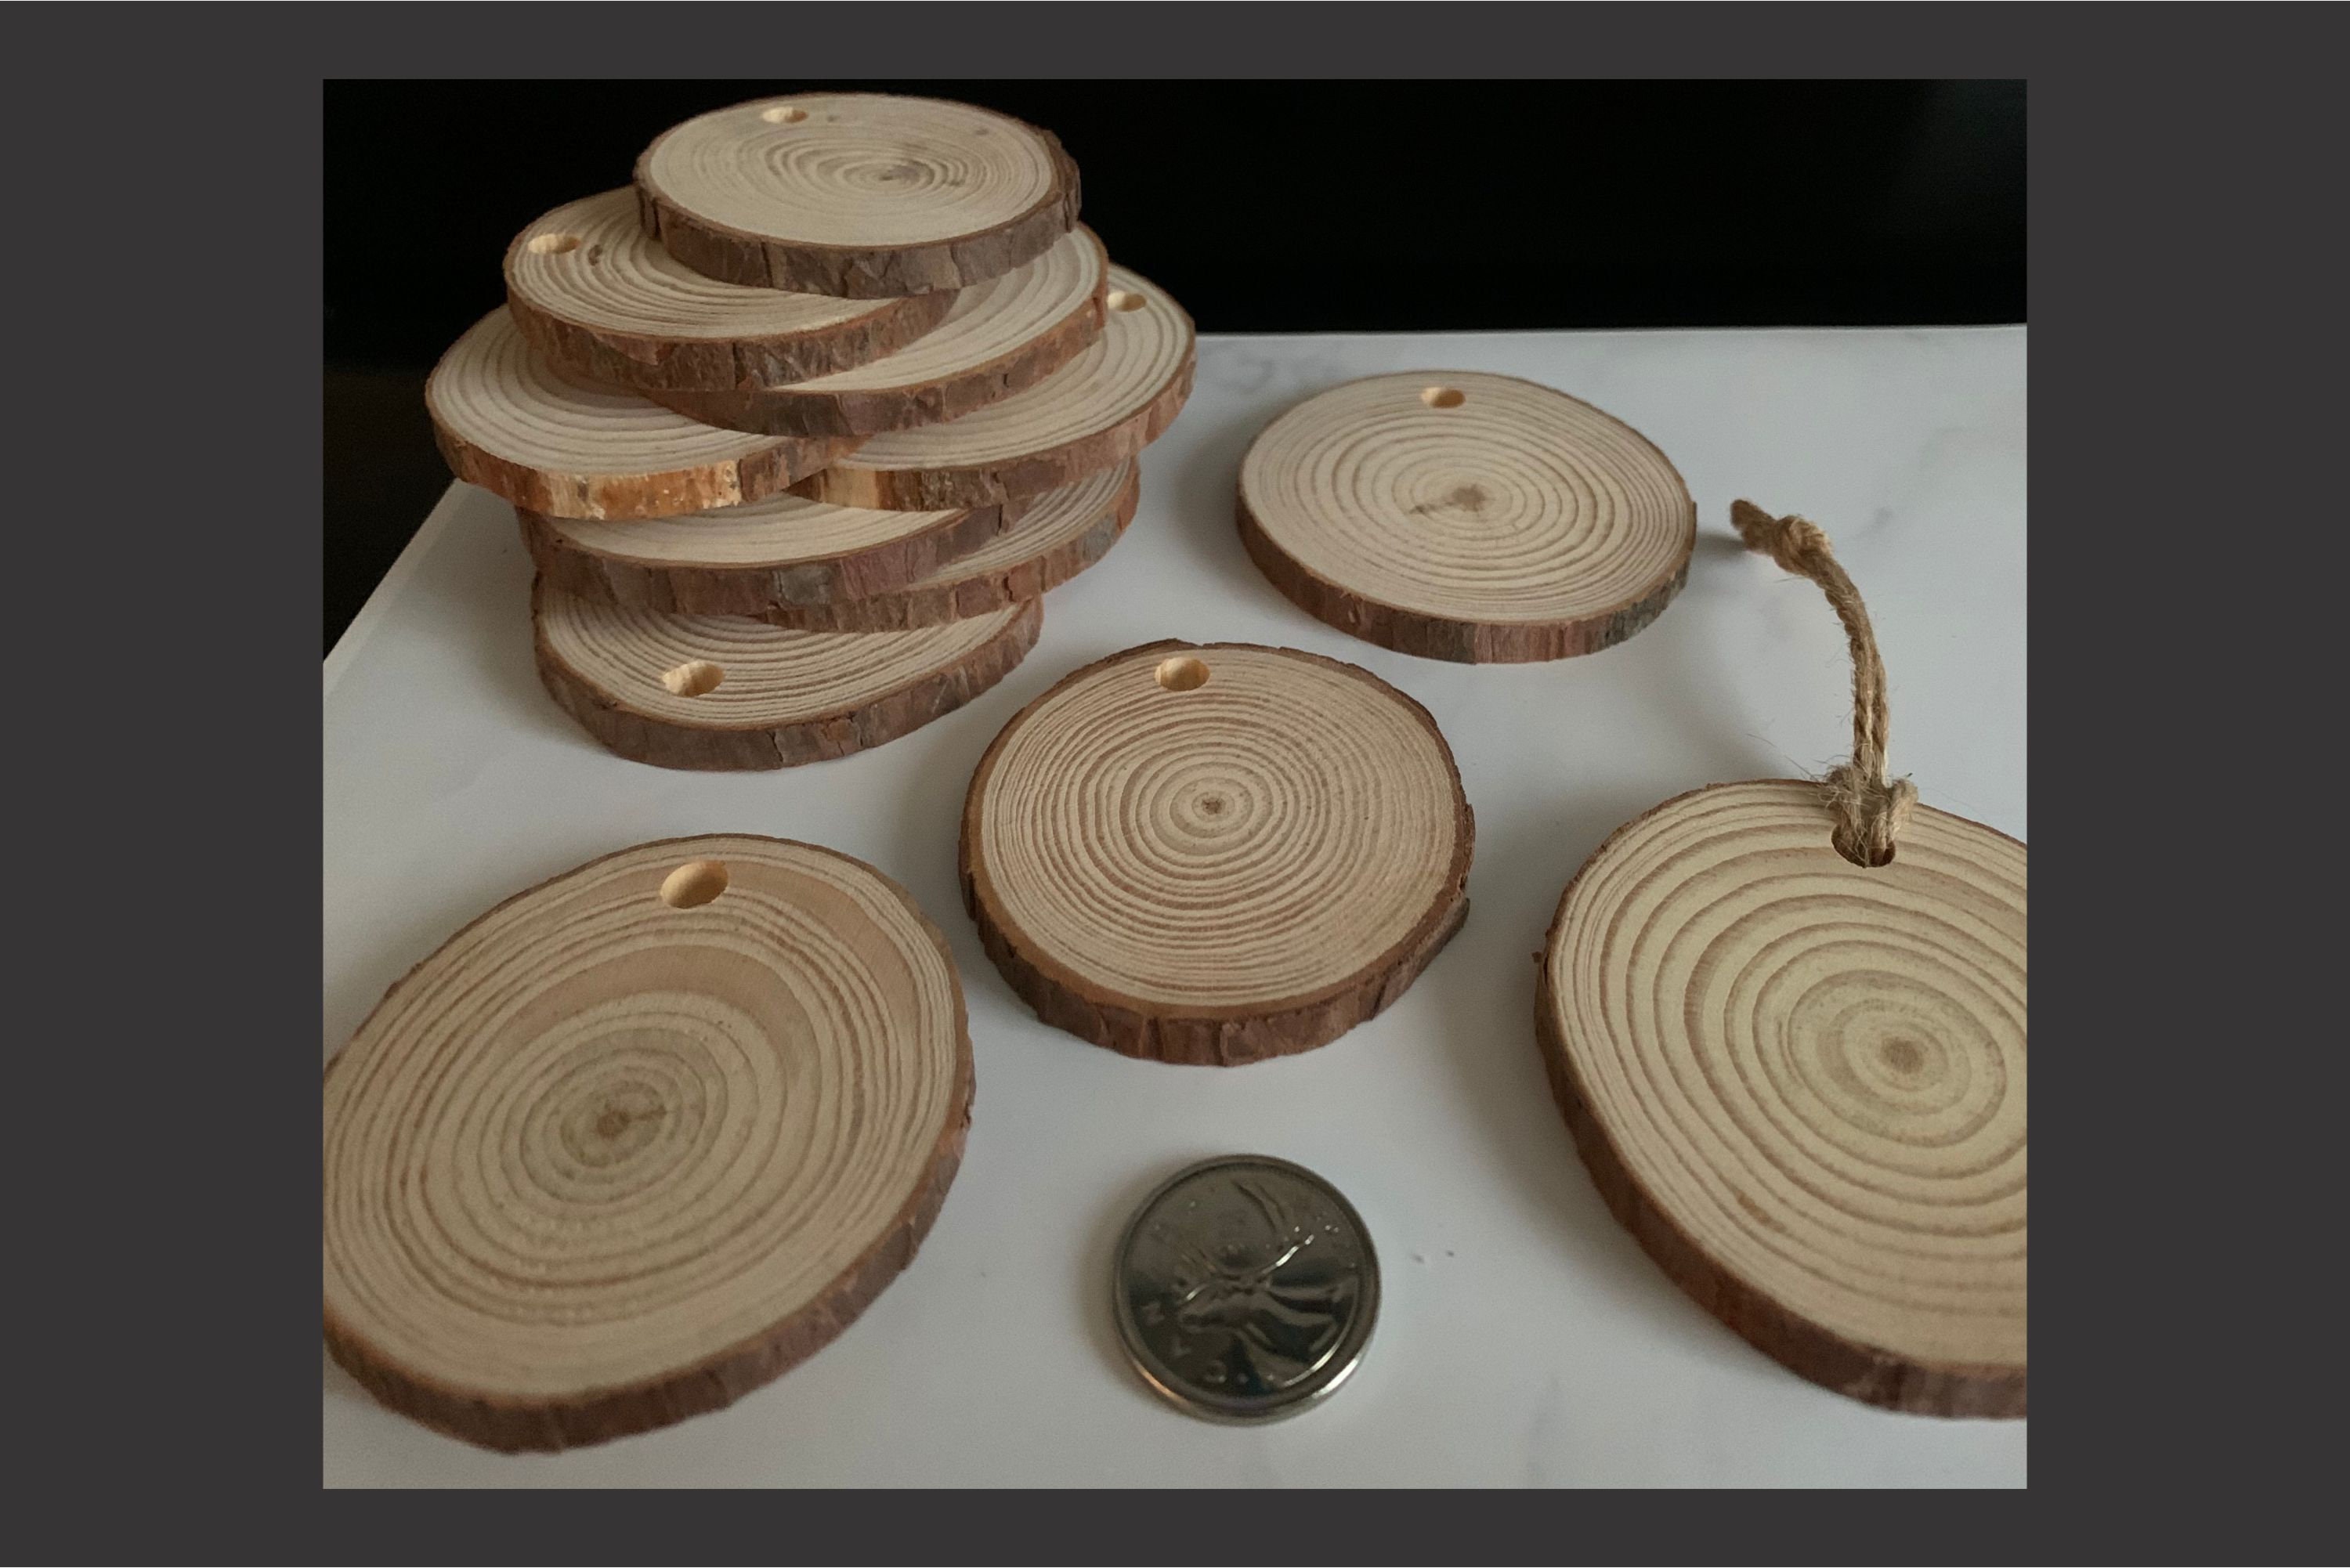 Naturally Preserved and Aged Cedar Slices, Three Sizes - FREE US Shipping